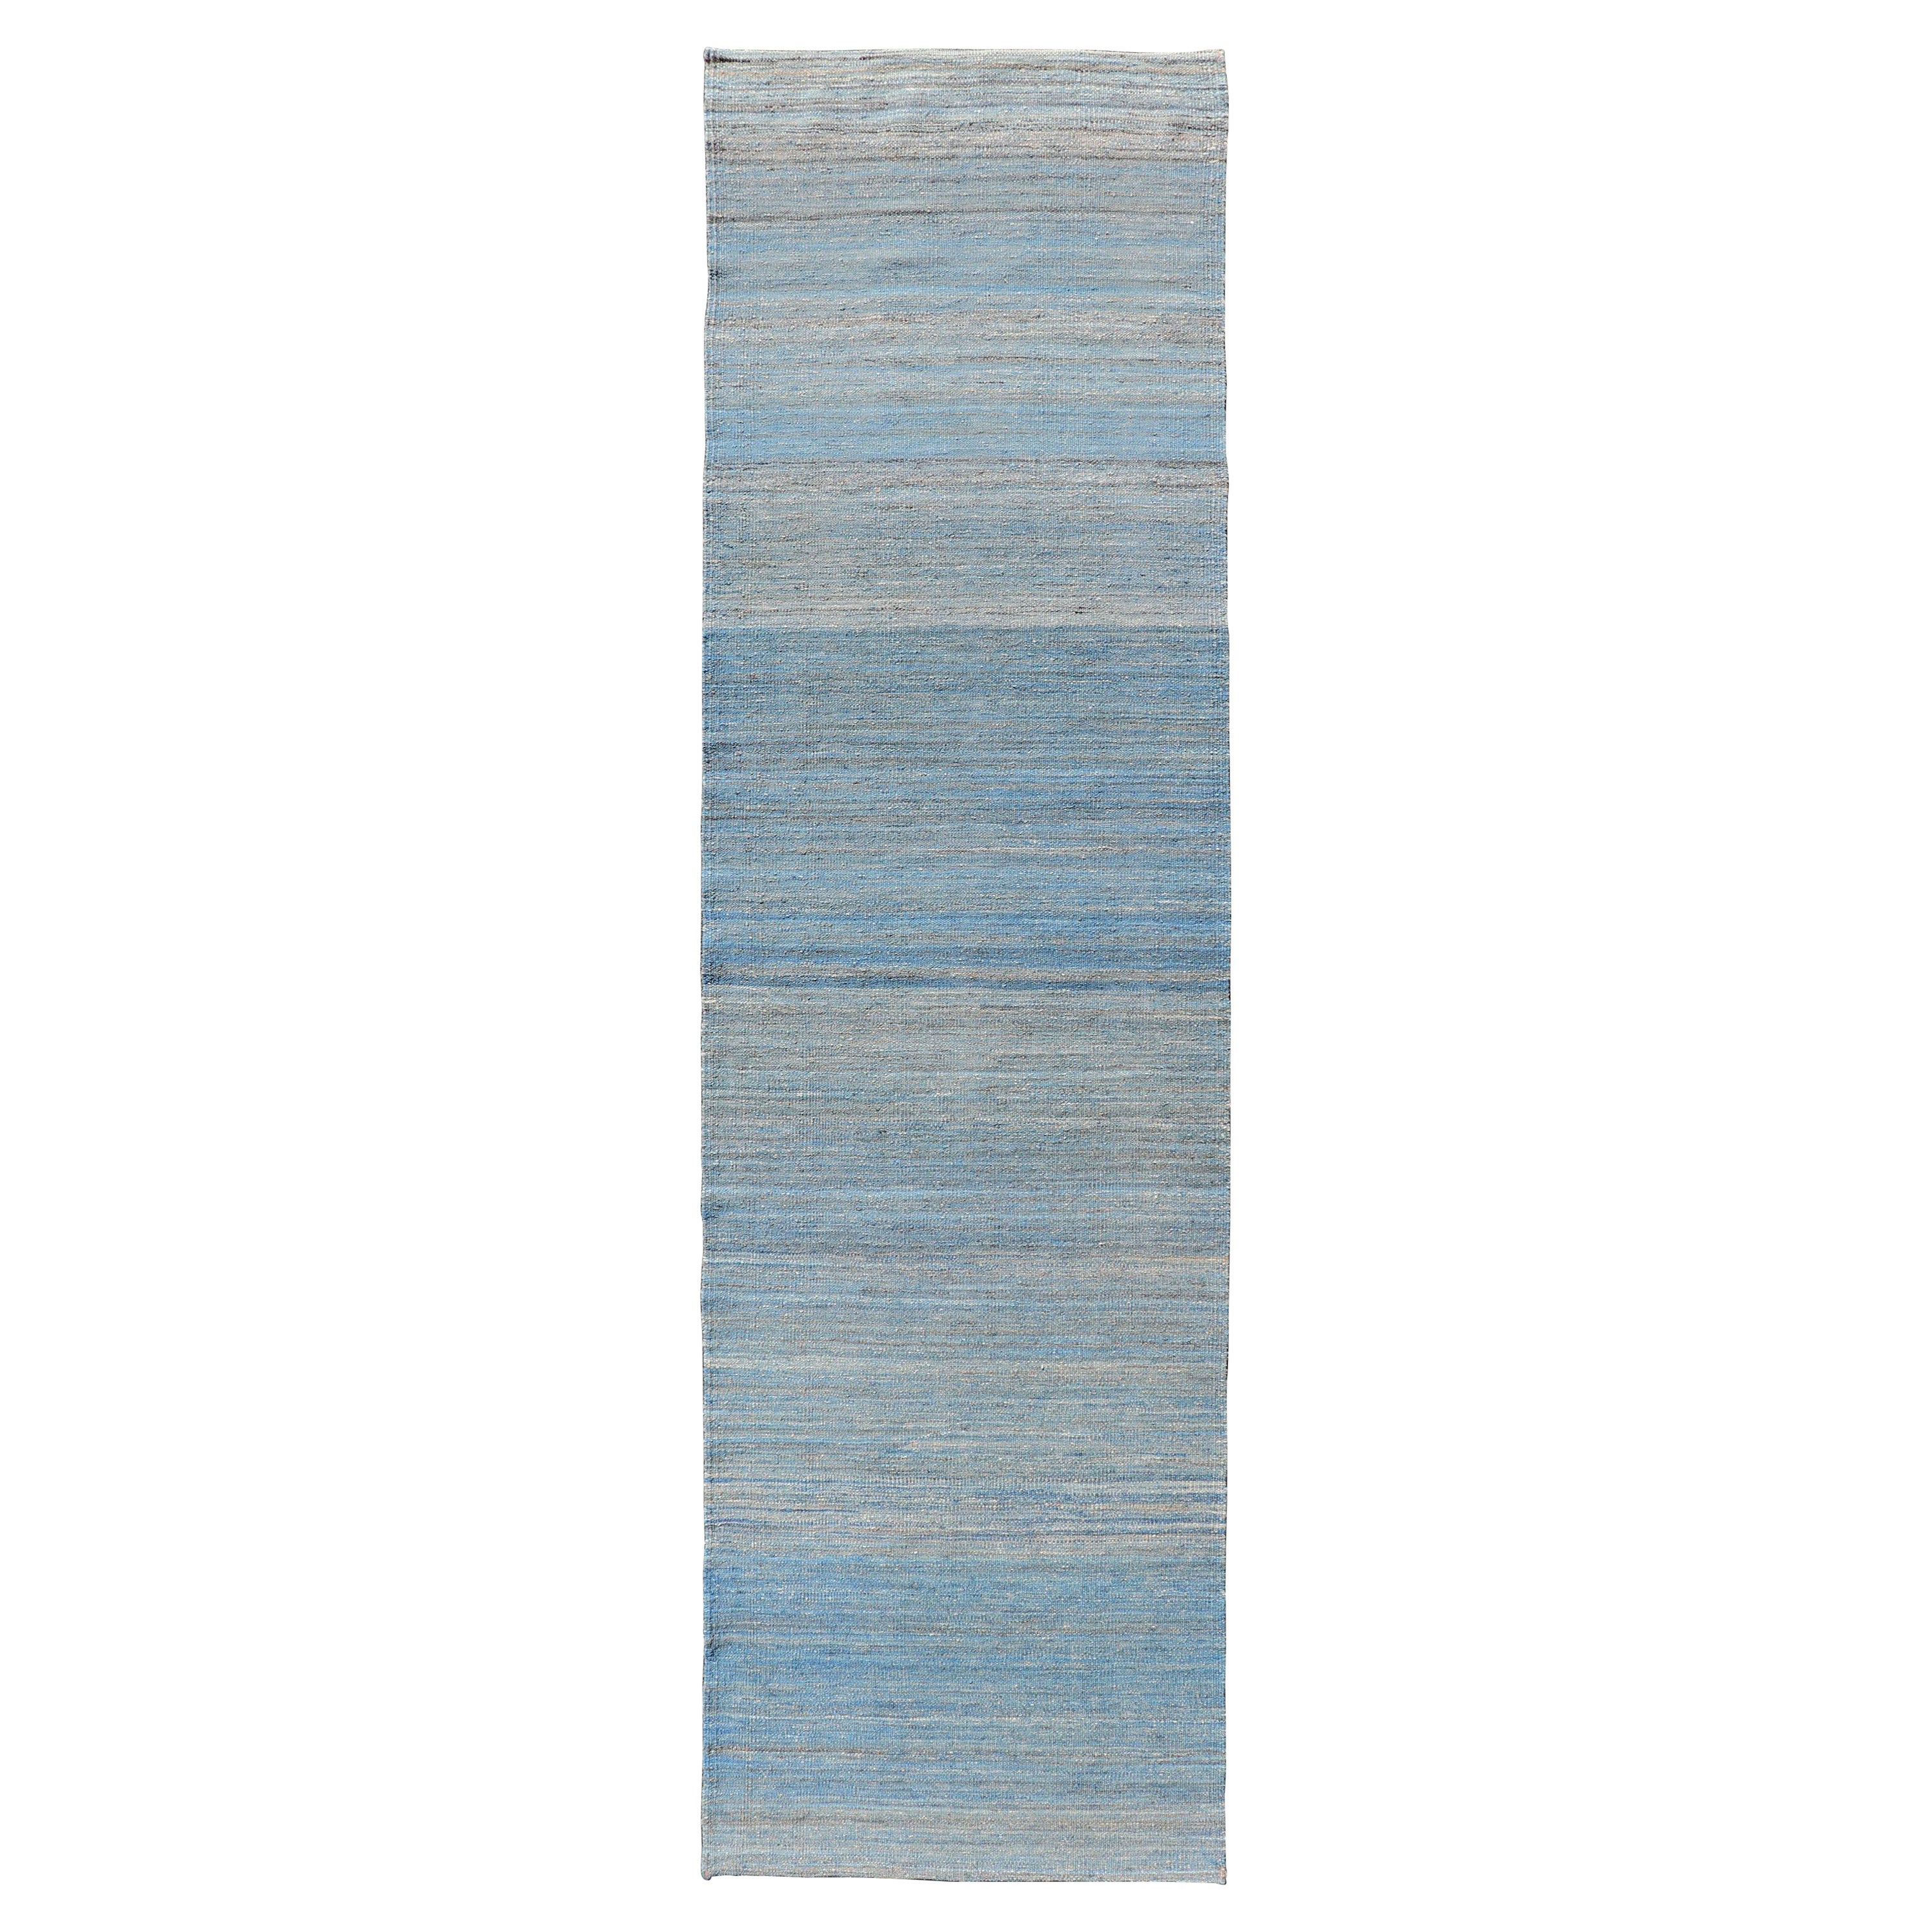 Runner Flat-Weave in Modern design in Shades of Blue, Green and Taupe